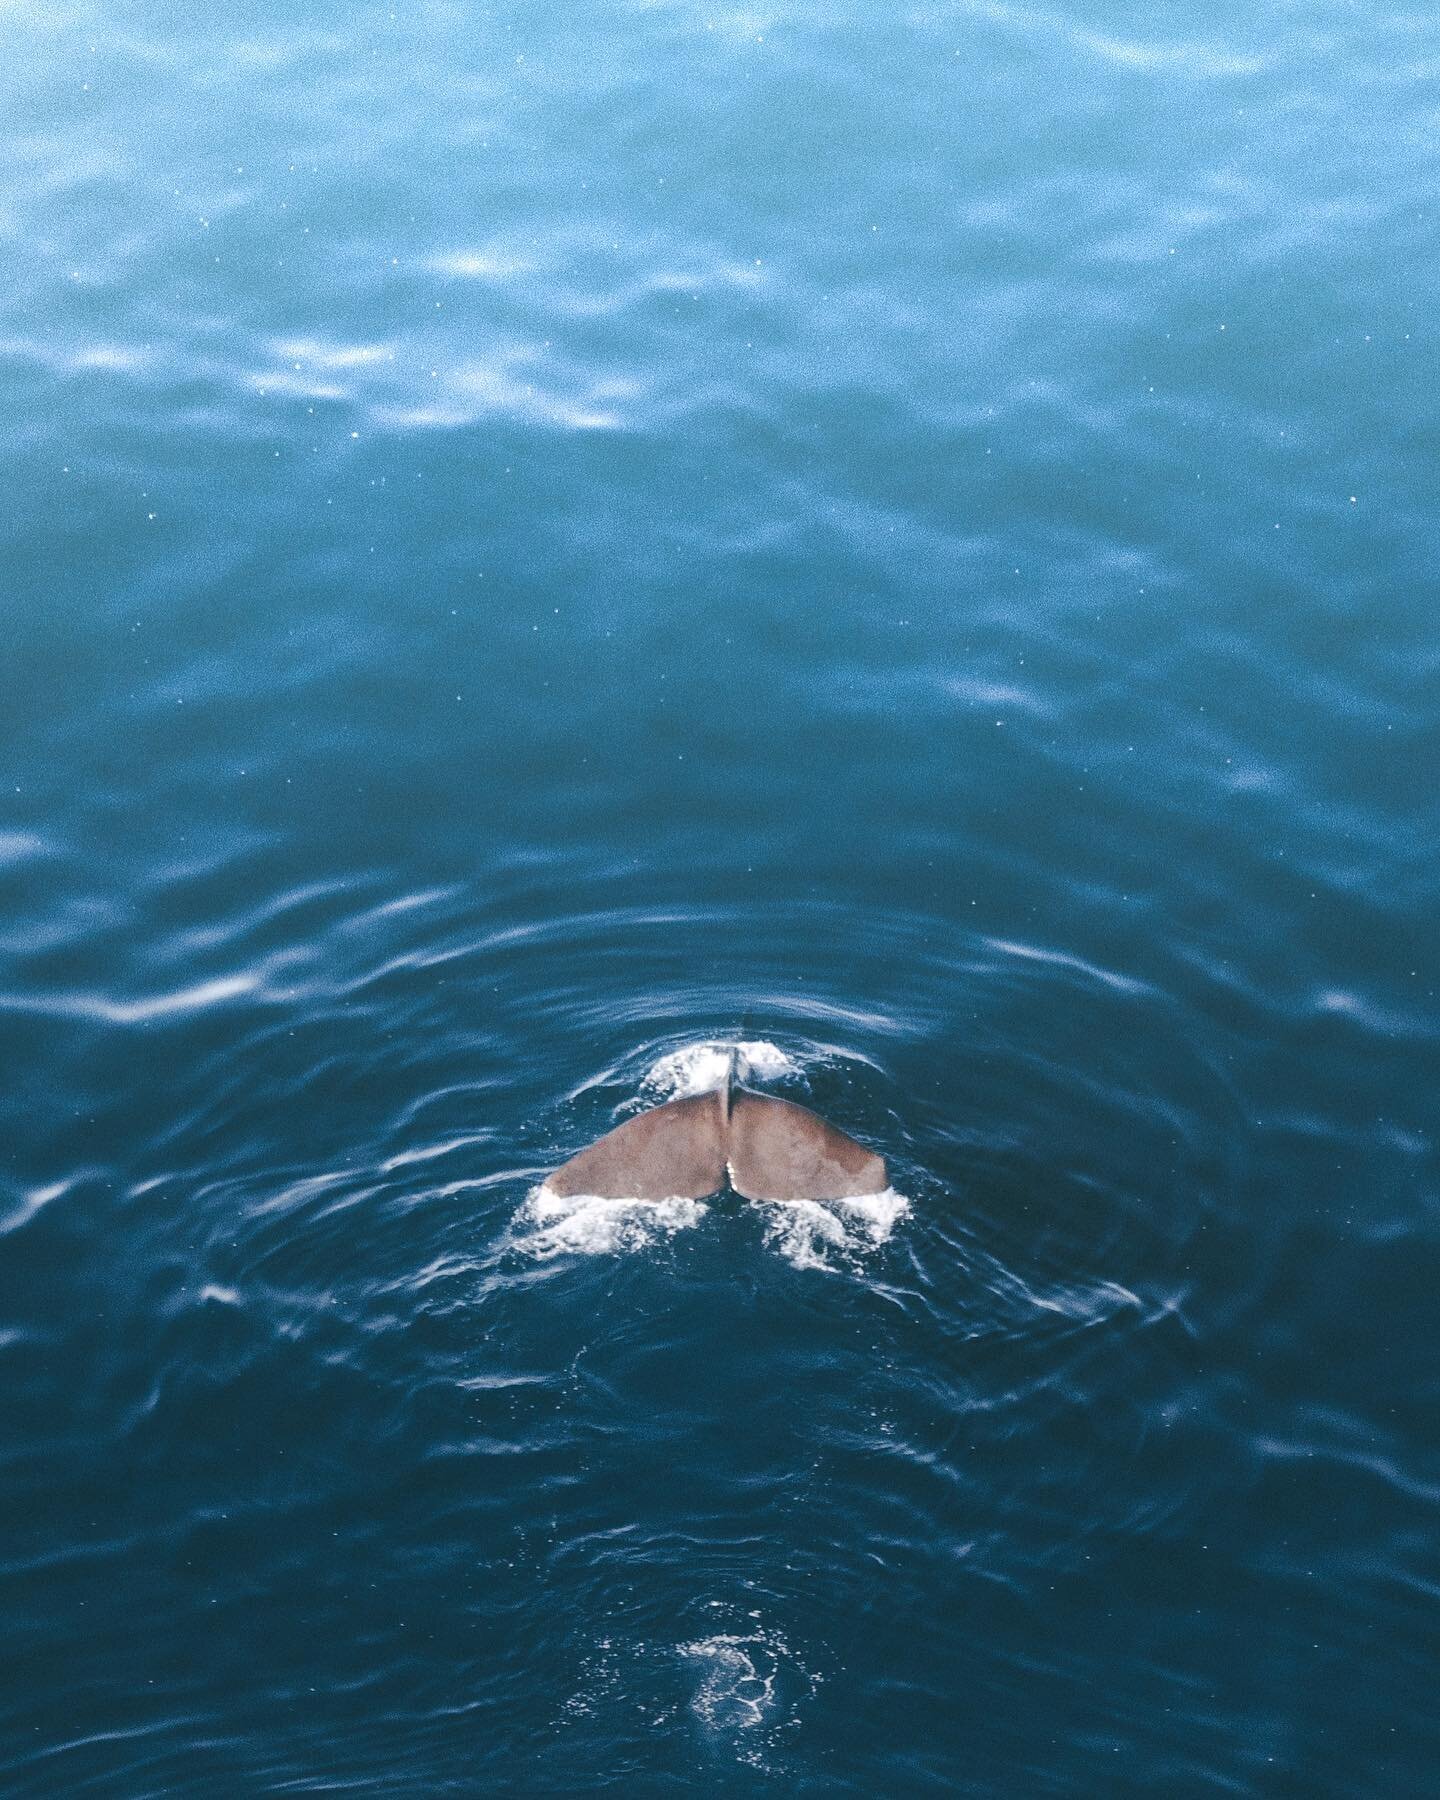 Still one of the best experiences seeing this guy dive back down into the depths of the ocean to look for more food. Crazy how big they still look even when looking down at them from a plane 😮
Have you ever gone whale watching?